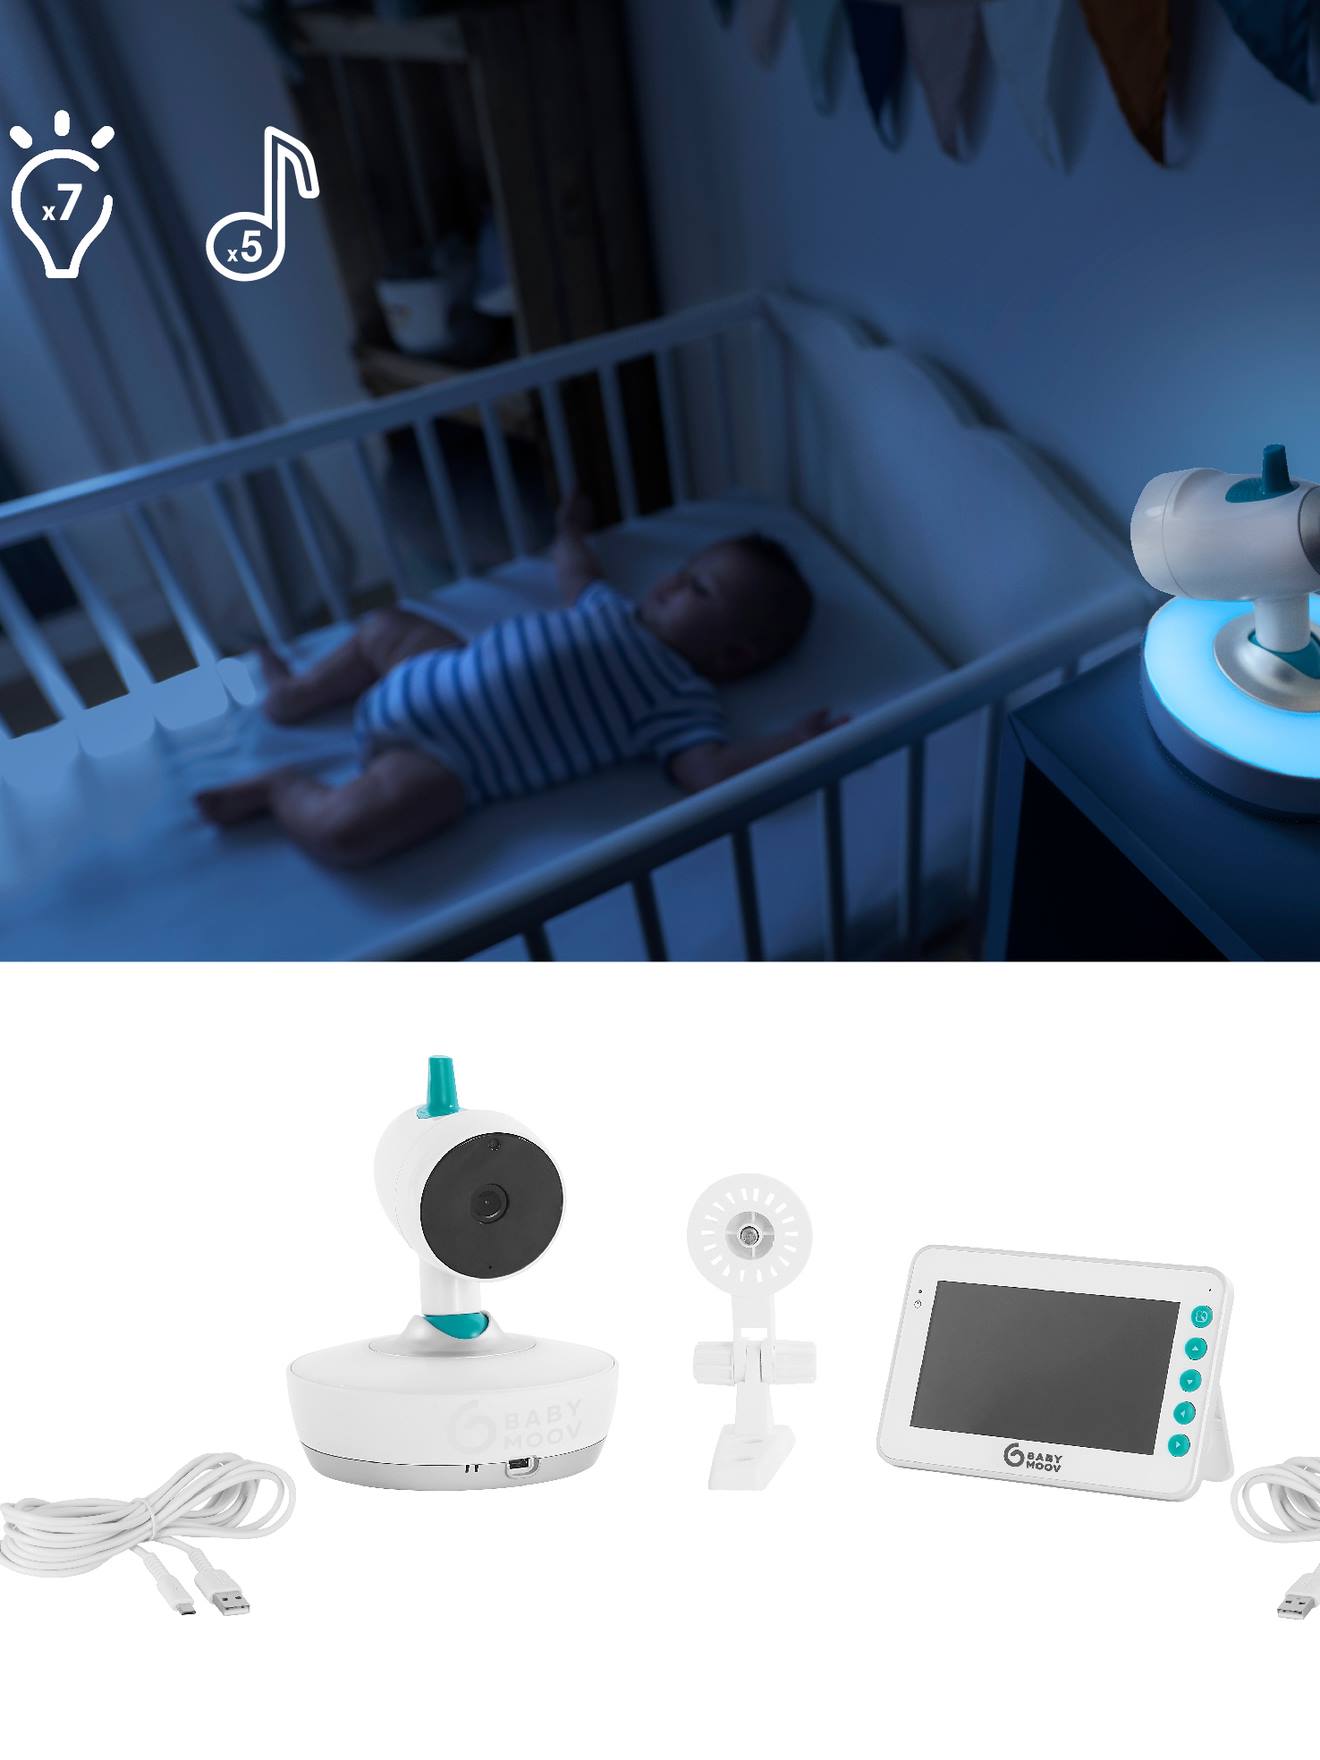 Babymoov Camera Additionnelle Motorisee Orientable a 360? pour Babyphone  Video Yoo Moov